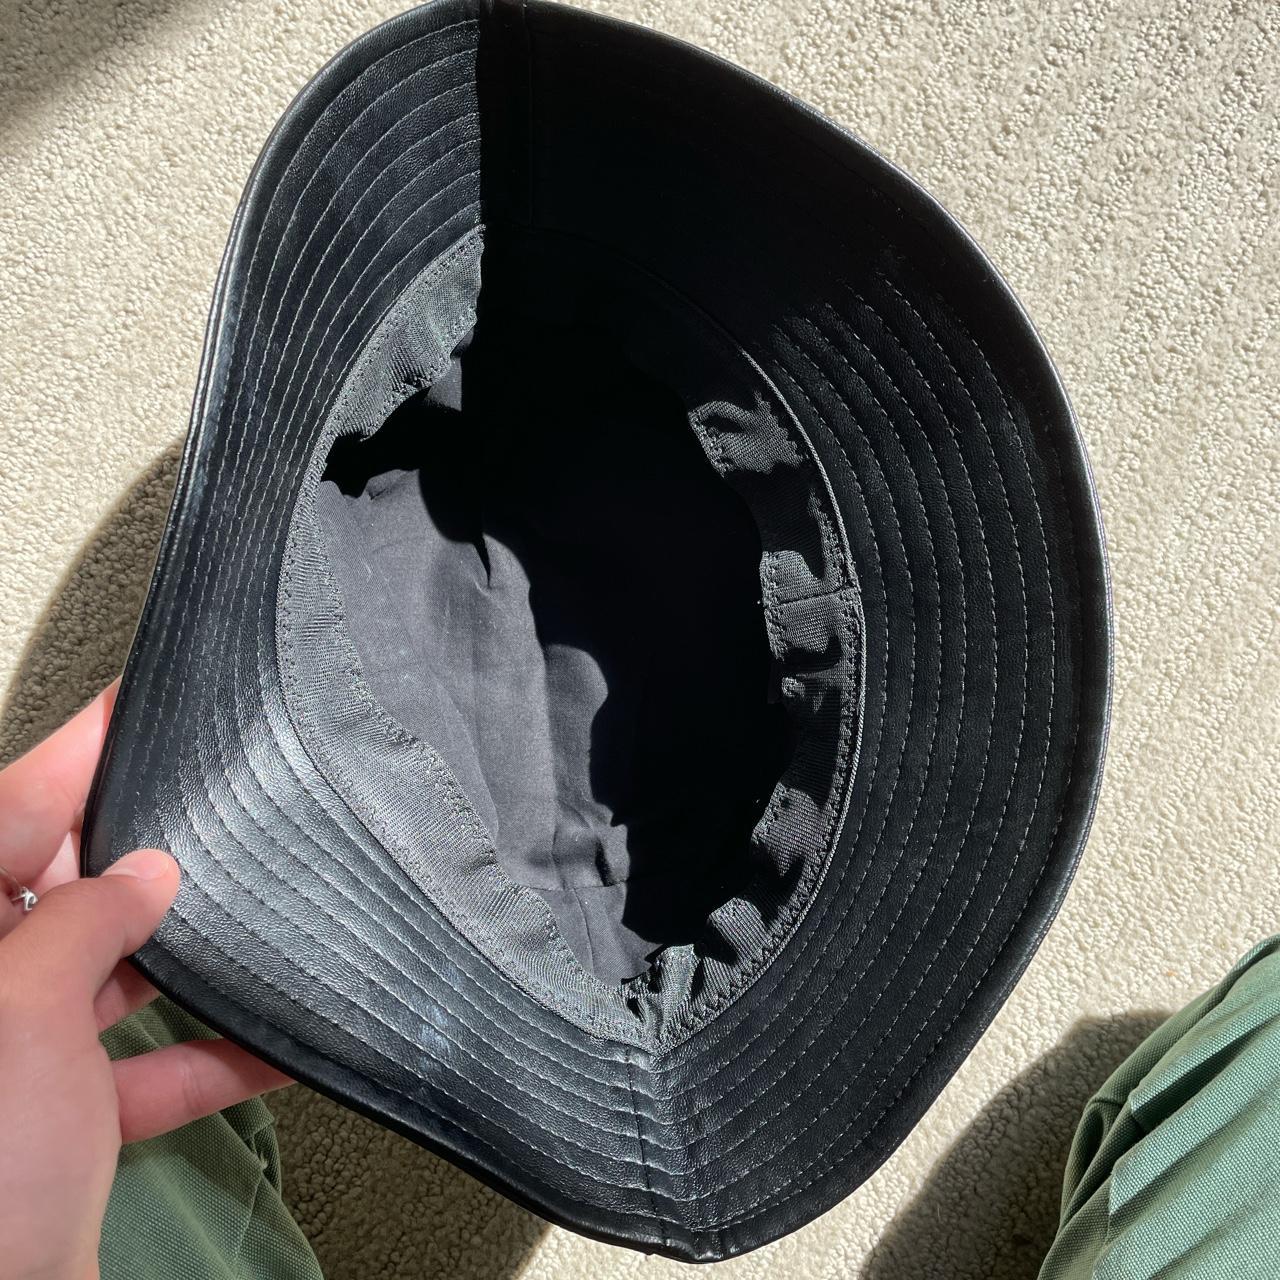 Product Image 2 - BLVCK bucket hat🖤
got this sent